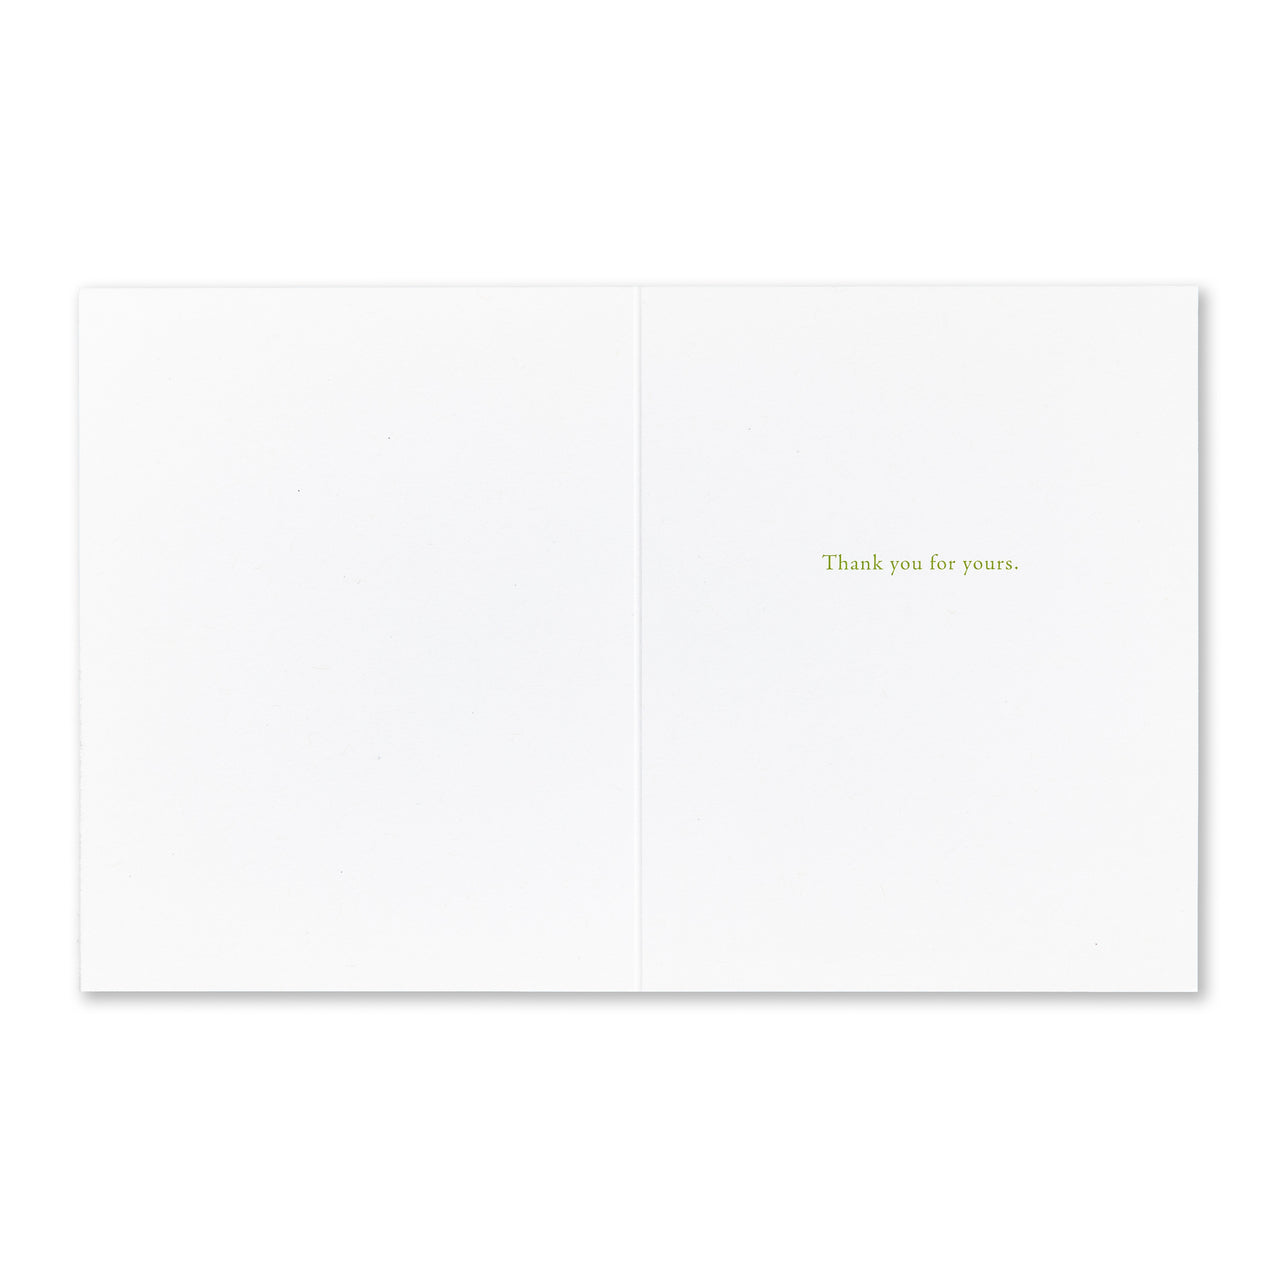 Positively Green Greeting Card - Thank You -  "Nothing in the World is So Strong as a Kind Heart" - Frances Hodgson Burnett - Mellow Monkey